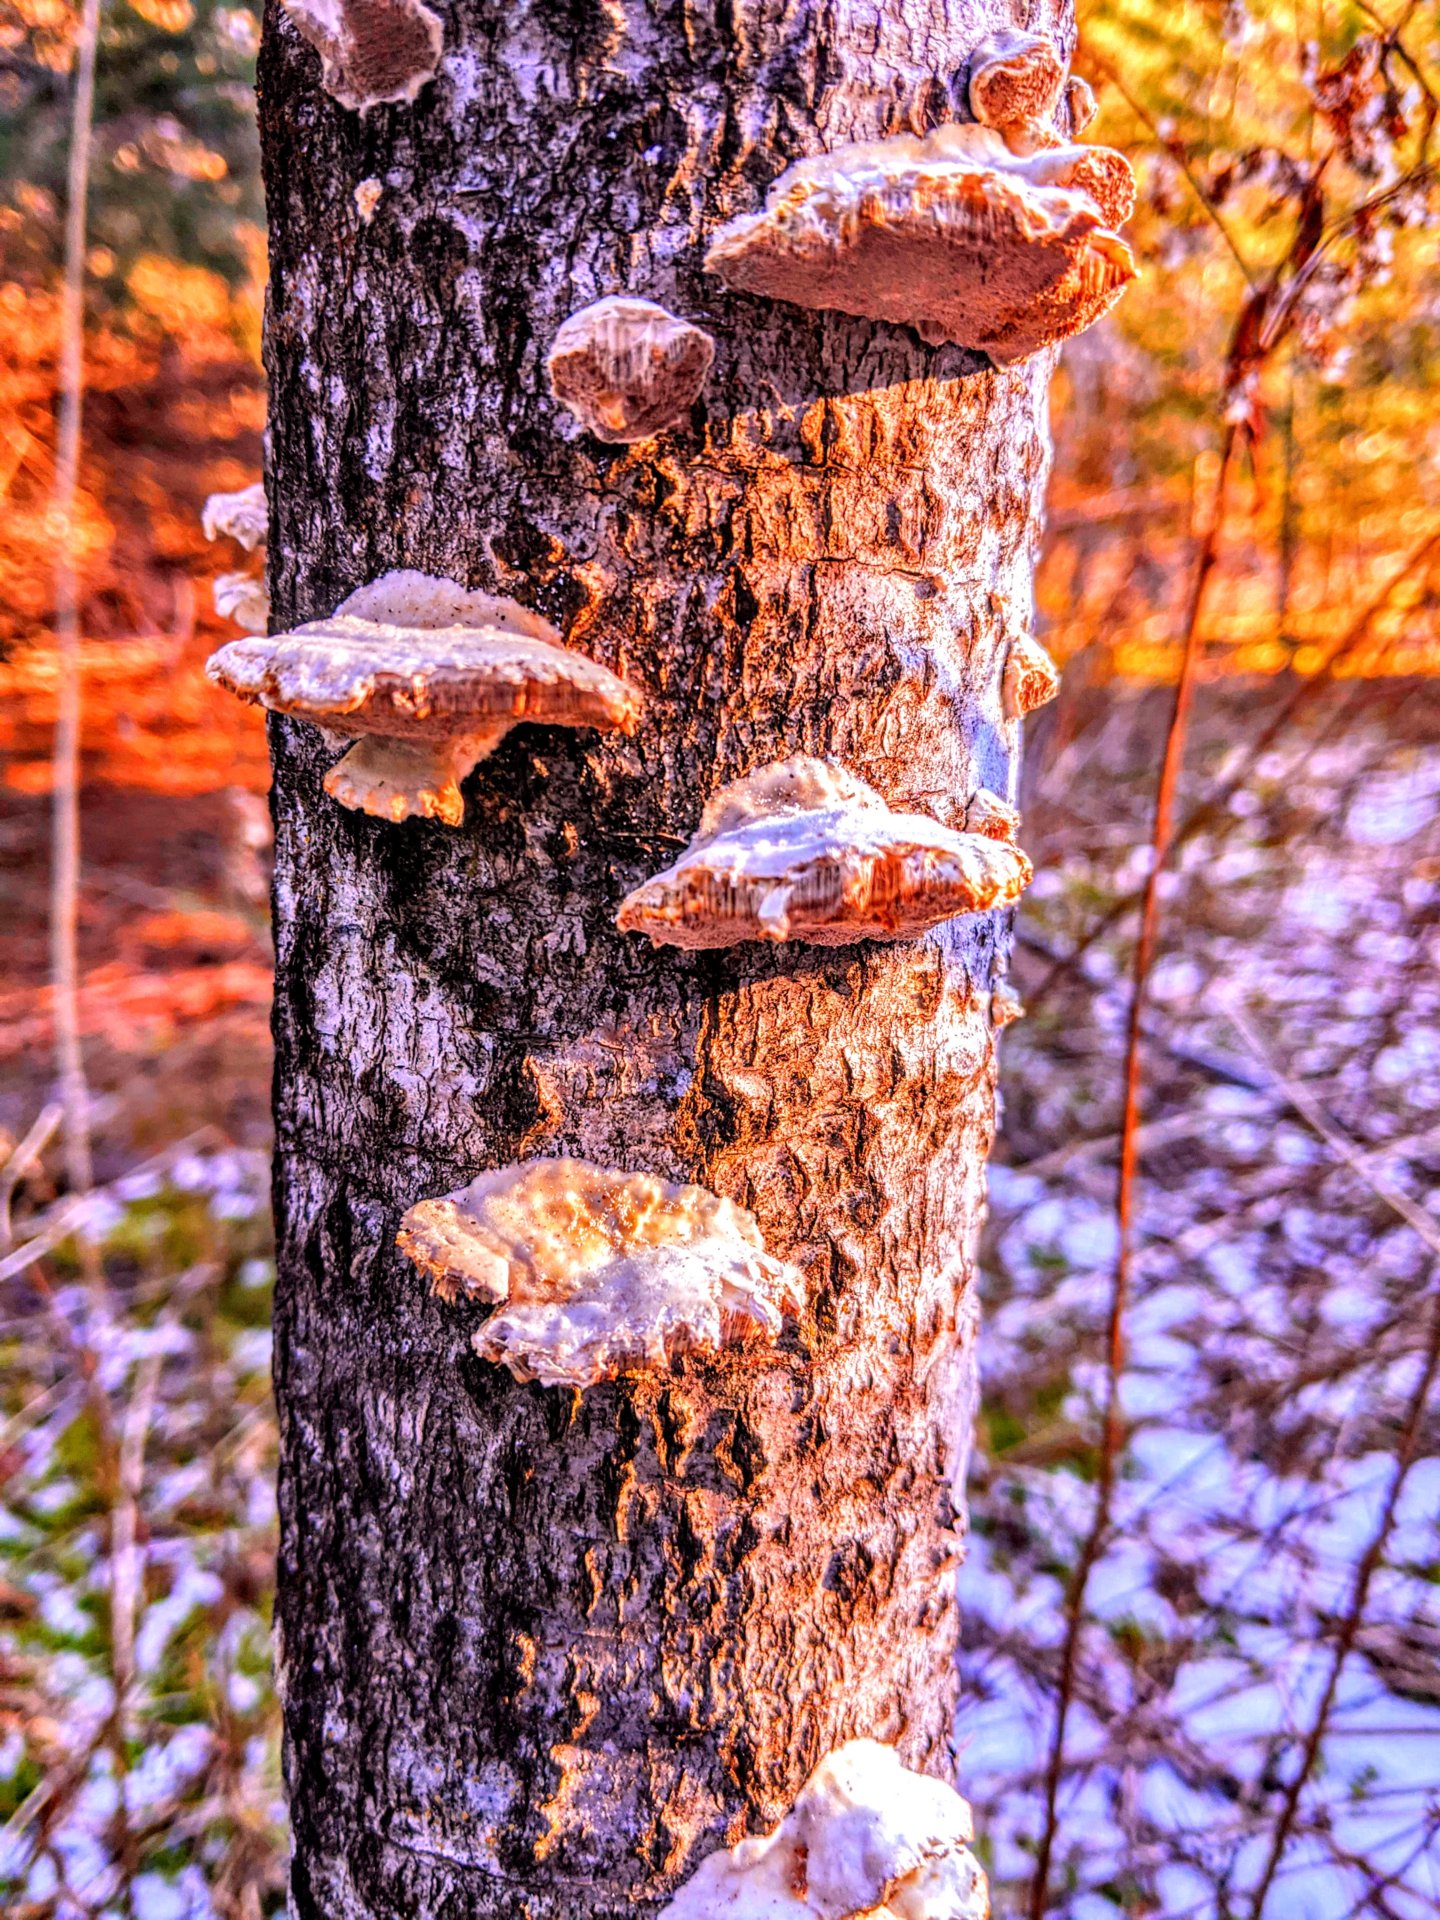 Cool mushrooms growing up a tree in Perry, Maine.